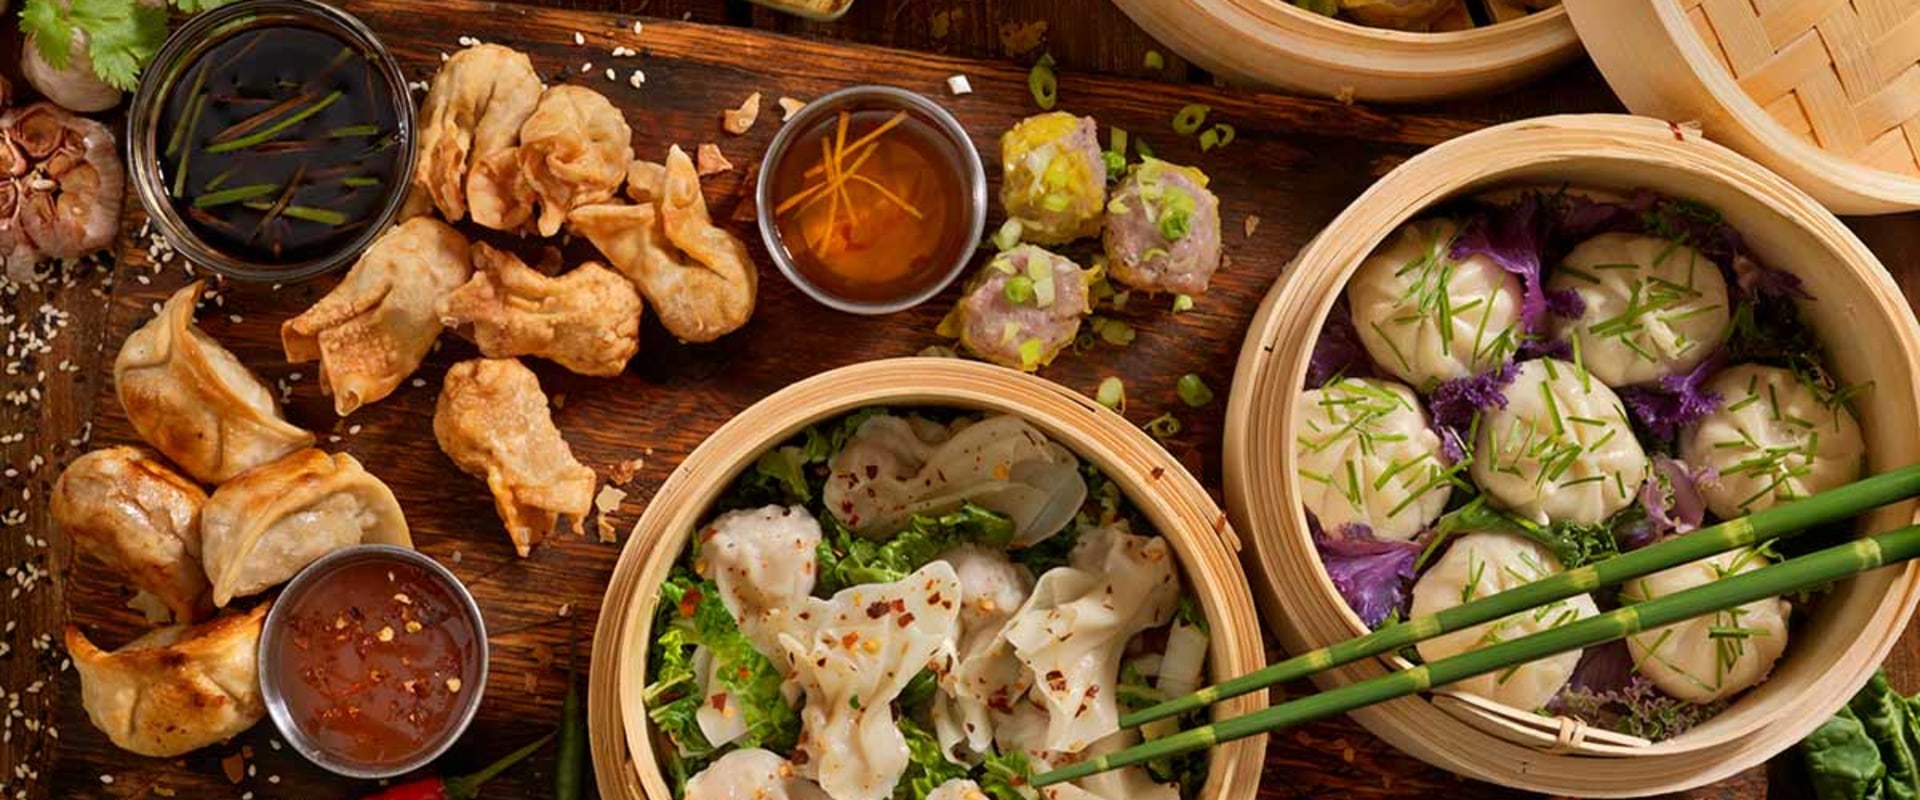 The 10 Most Popular Dishes at Chinese Restaurants: A Guide for Restaurant Owners